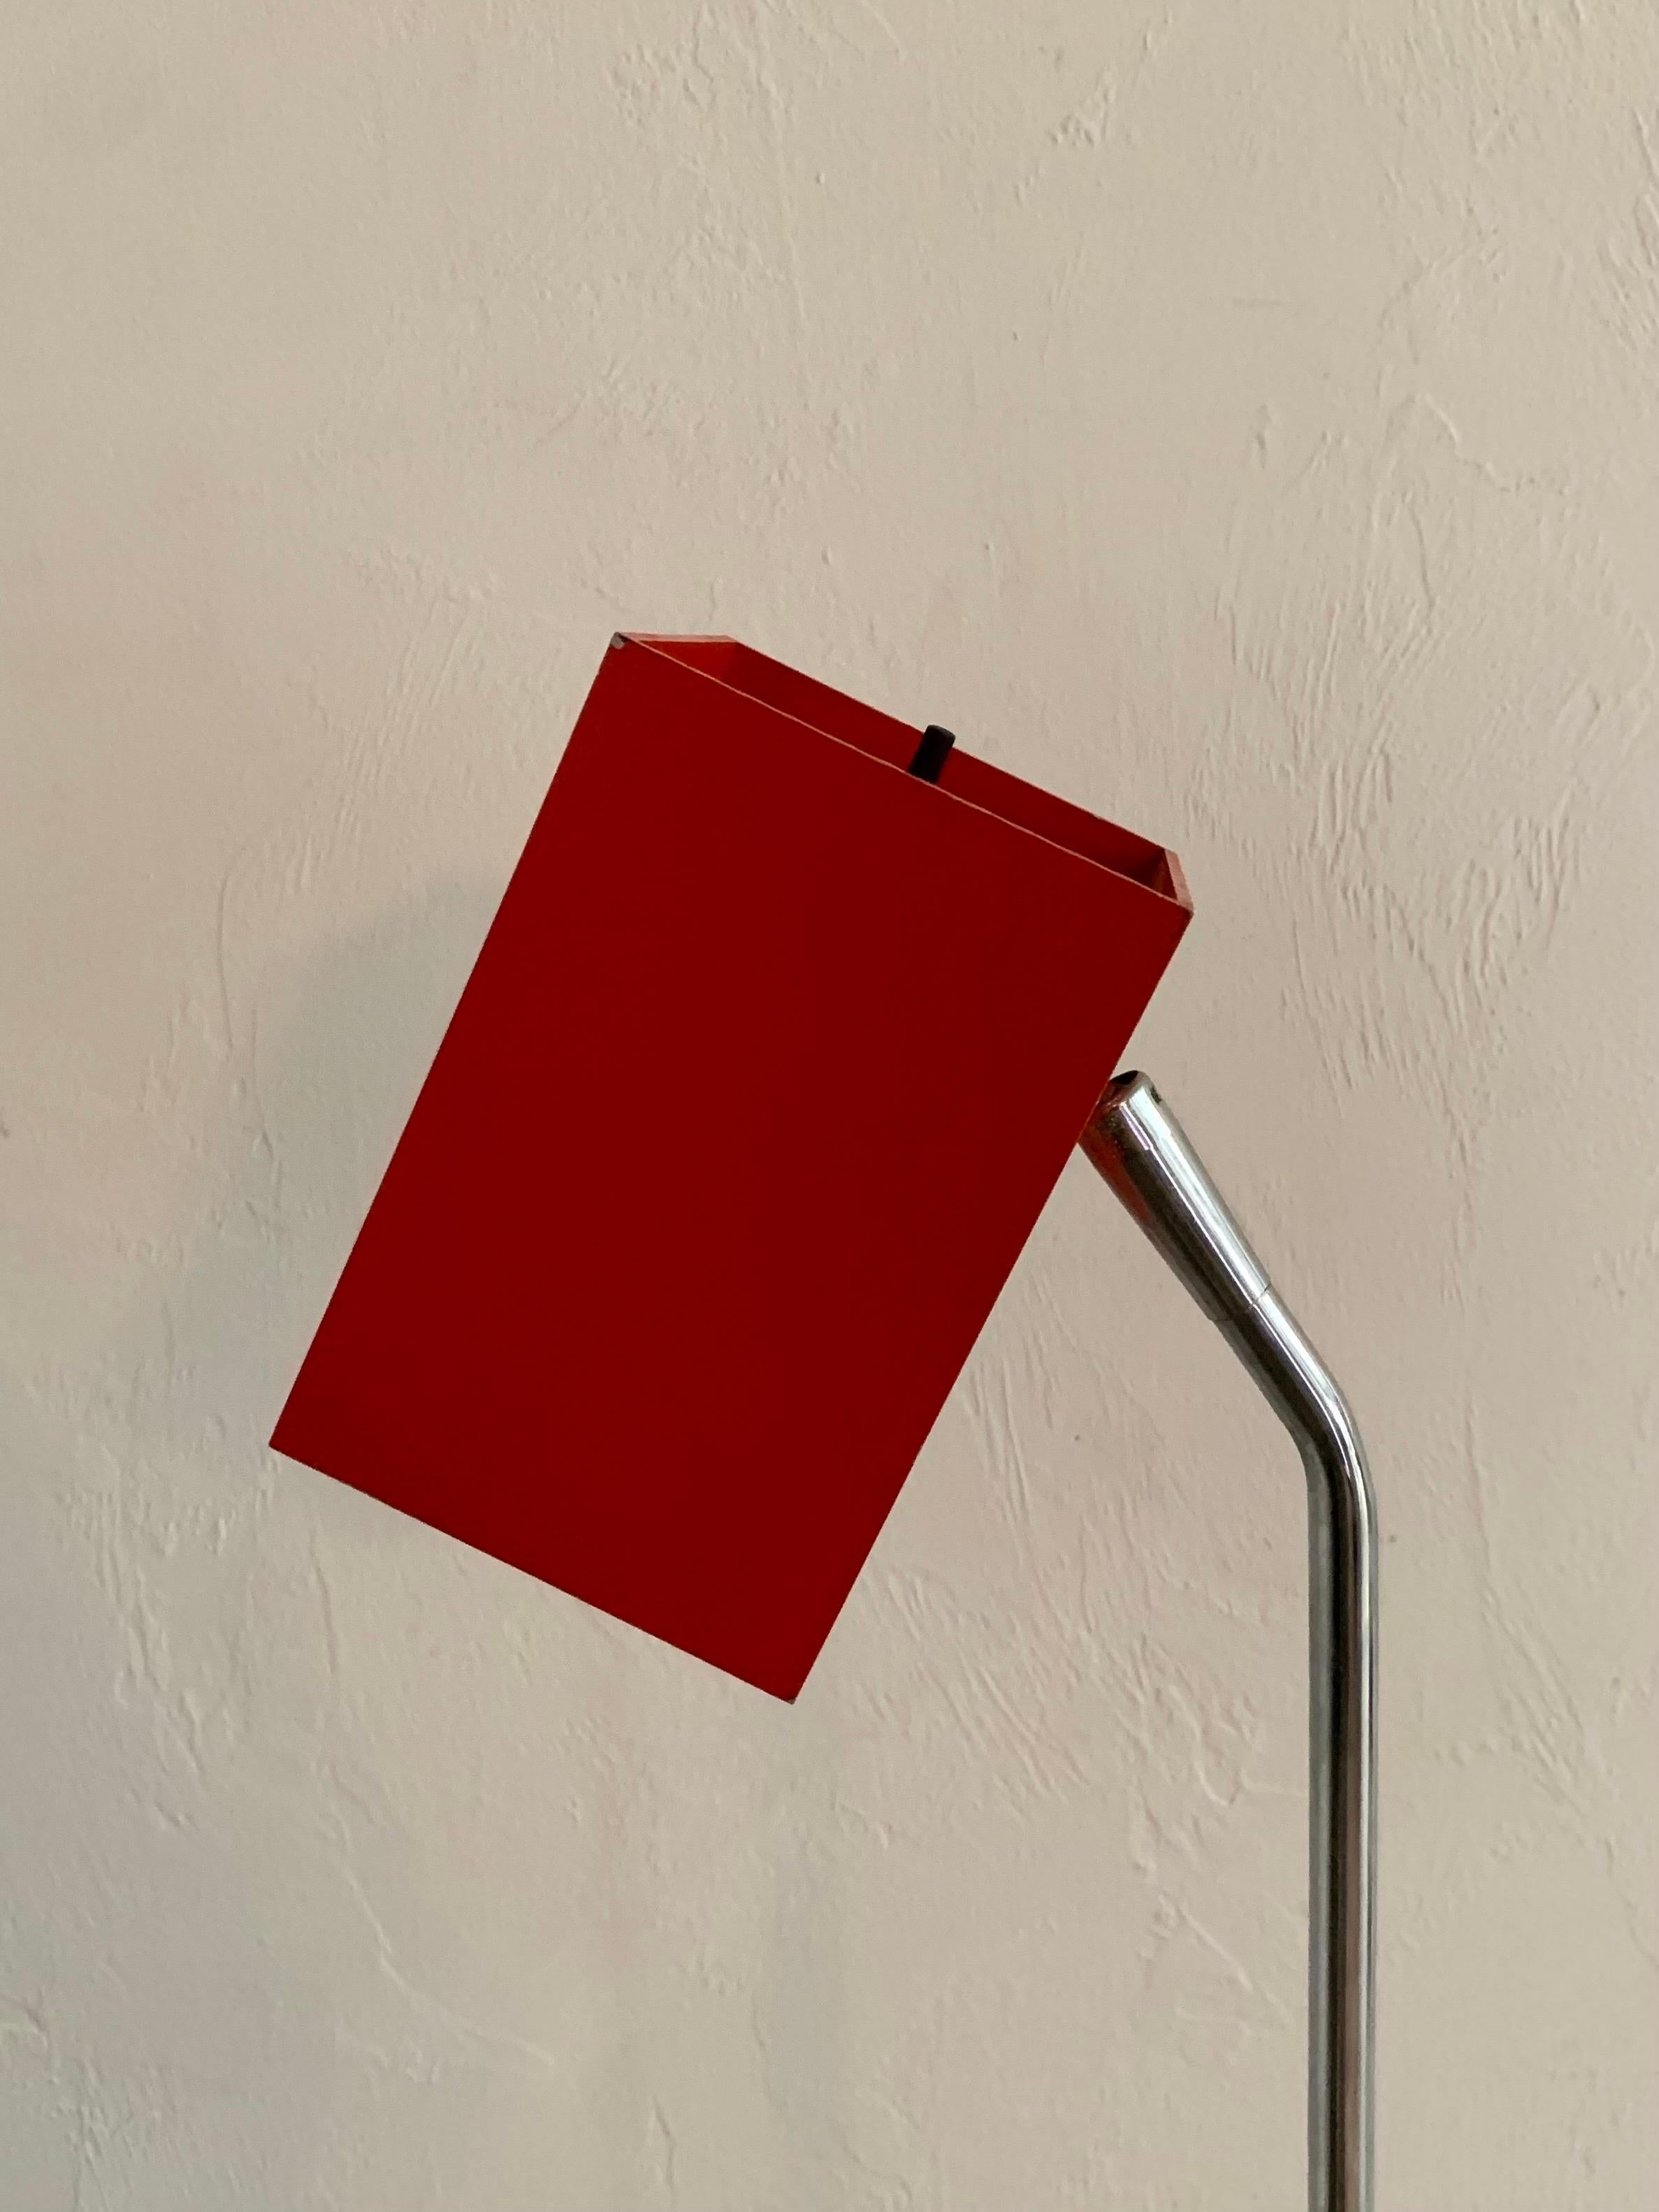 North American Sonneman for Kovacs Steel and Chrome Cubist Floor Lamp in Red, 1950s For Sale